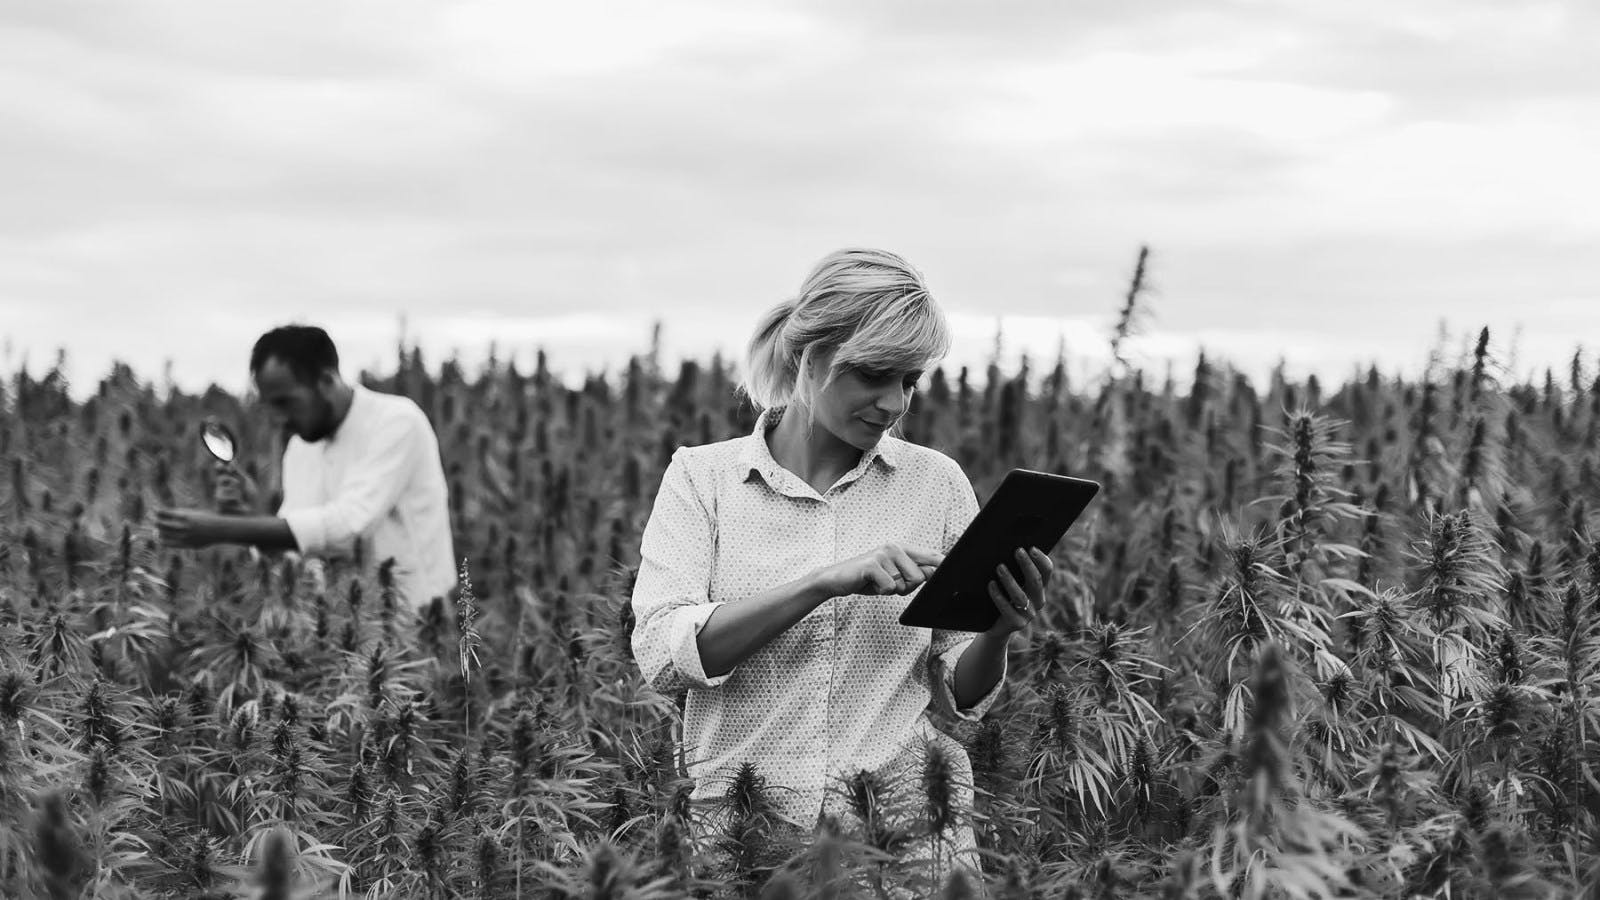 What I Learned Raising Funds in Six Months for My Cannabis Company